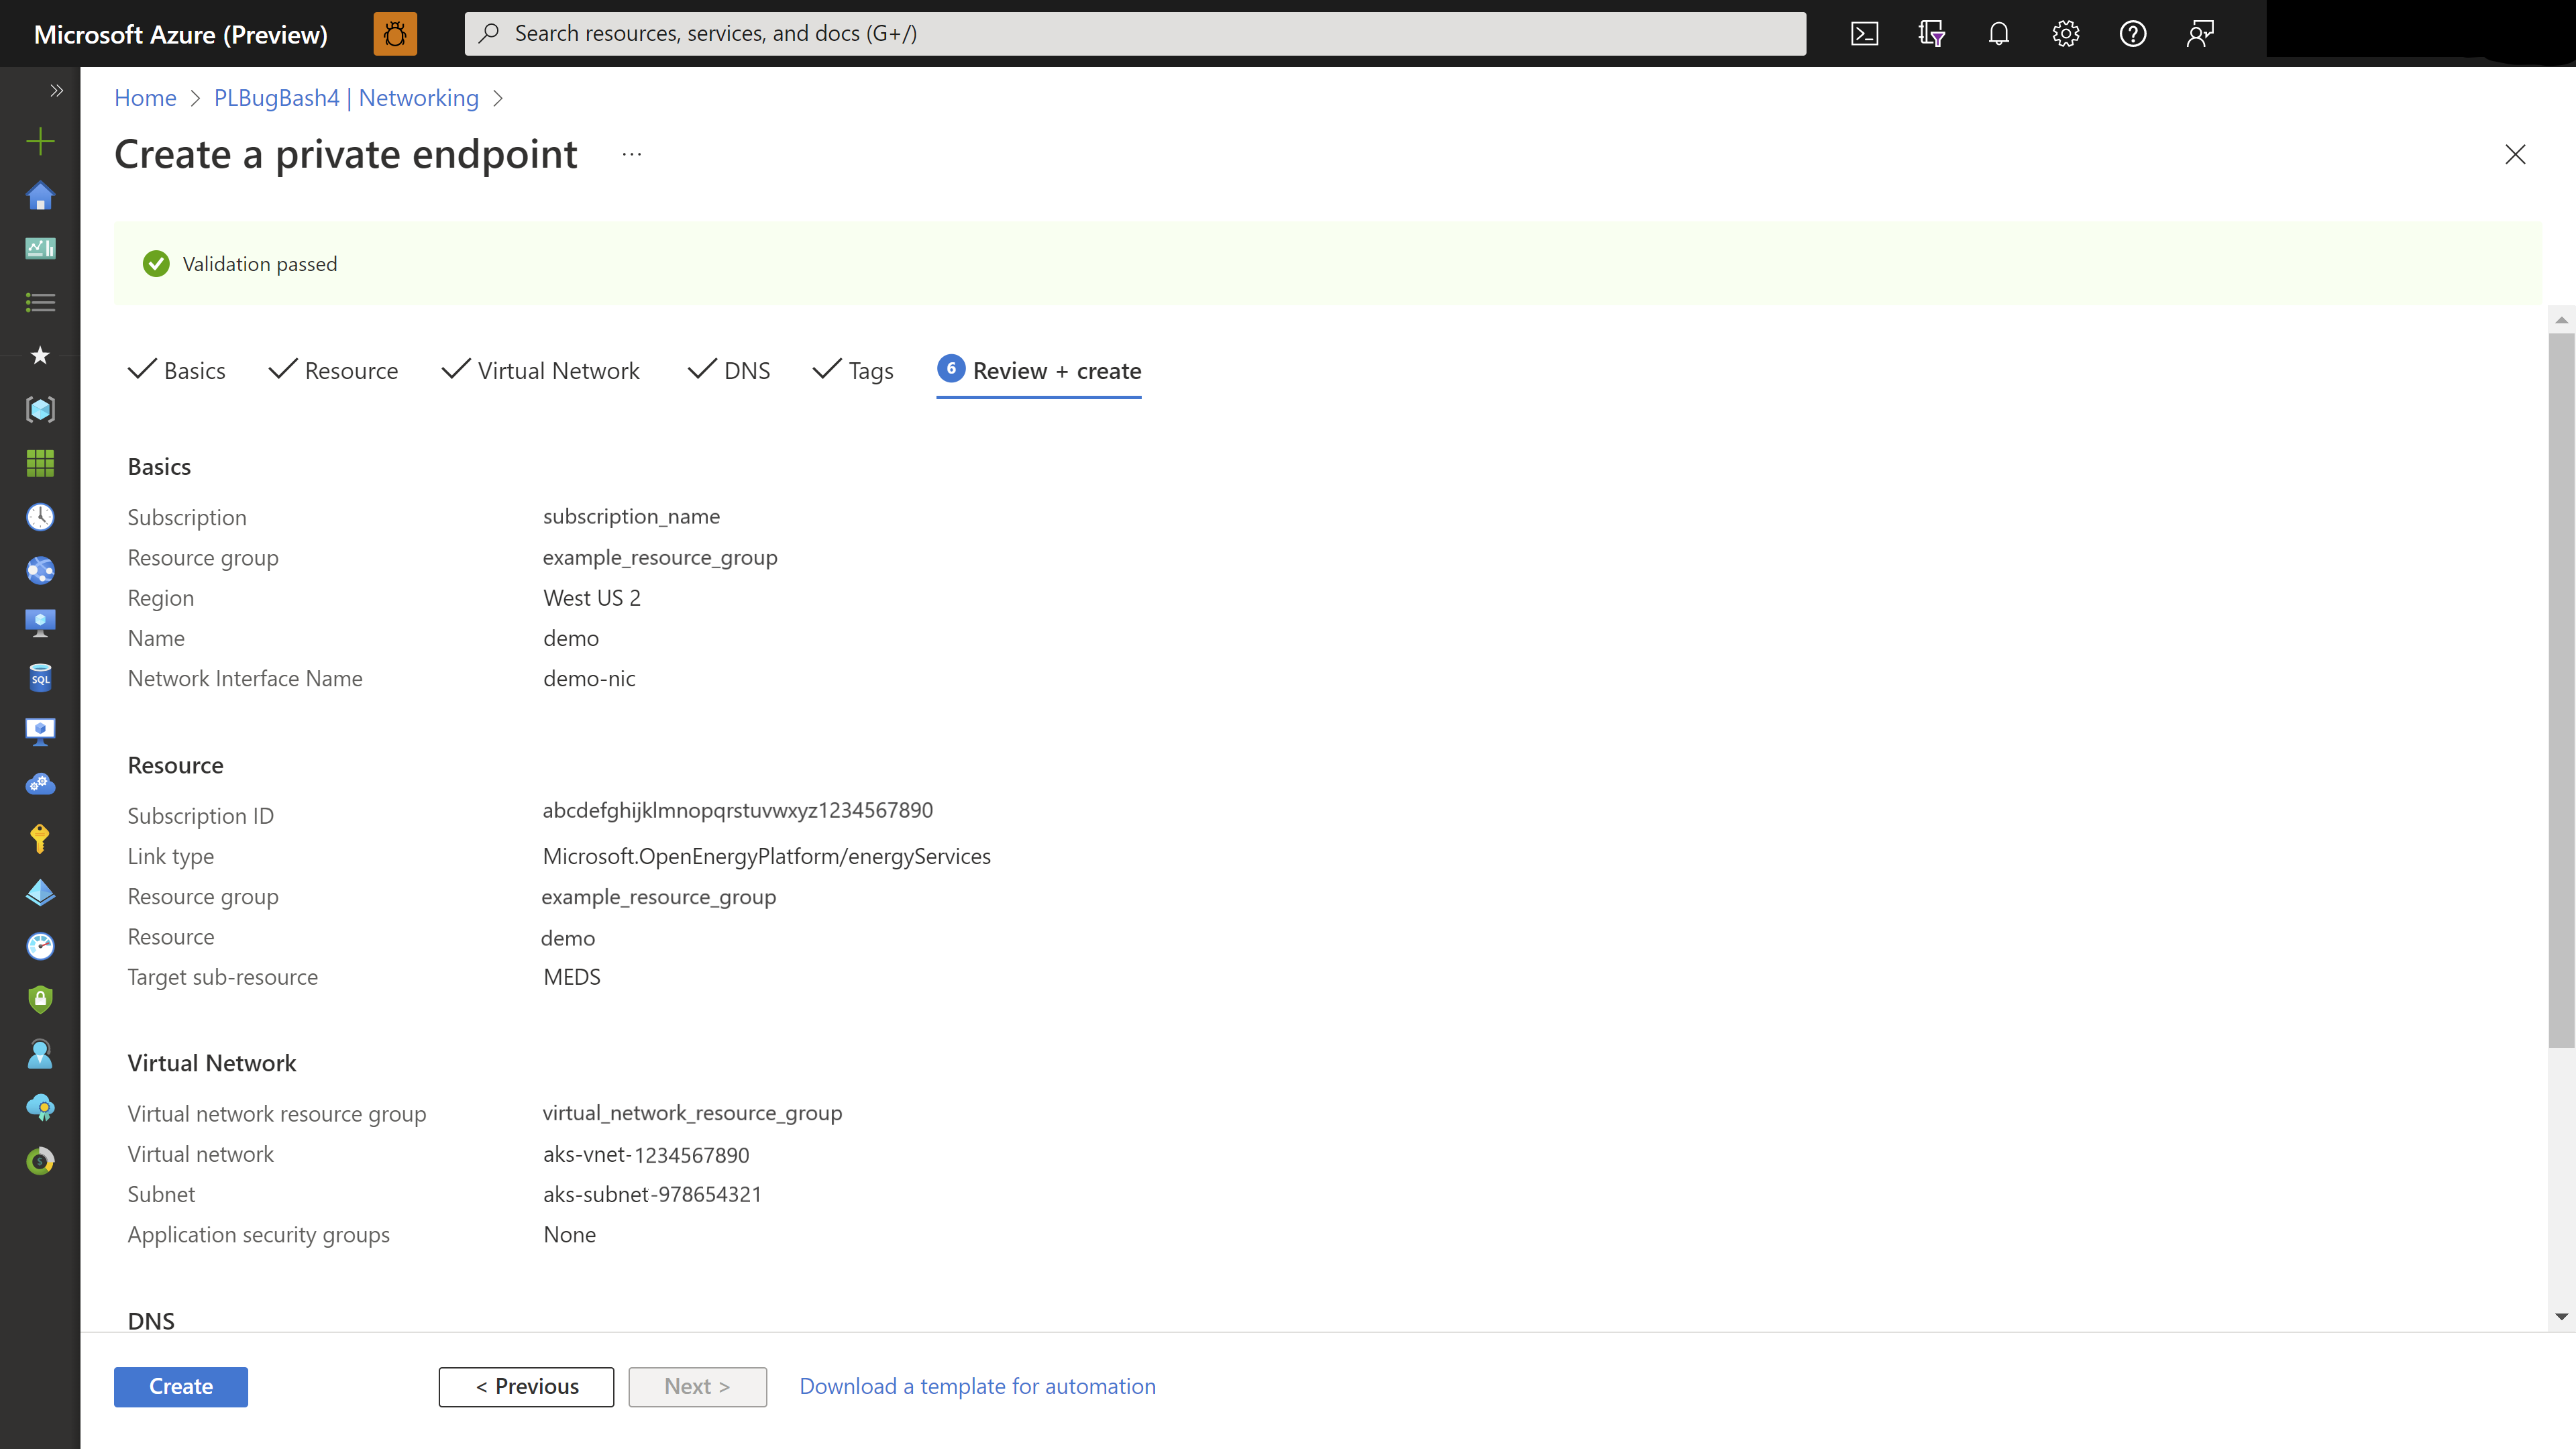 Screenshot of the page that summarizes and validates configuration of your private endpoint.